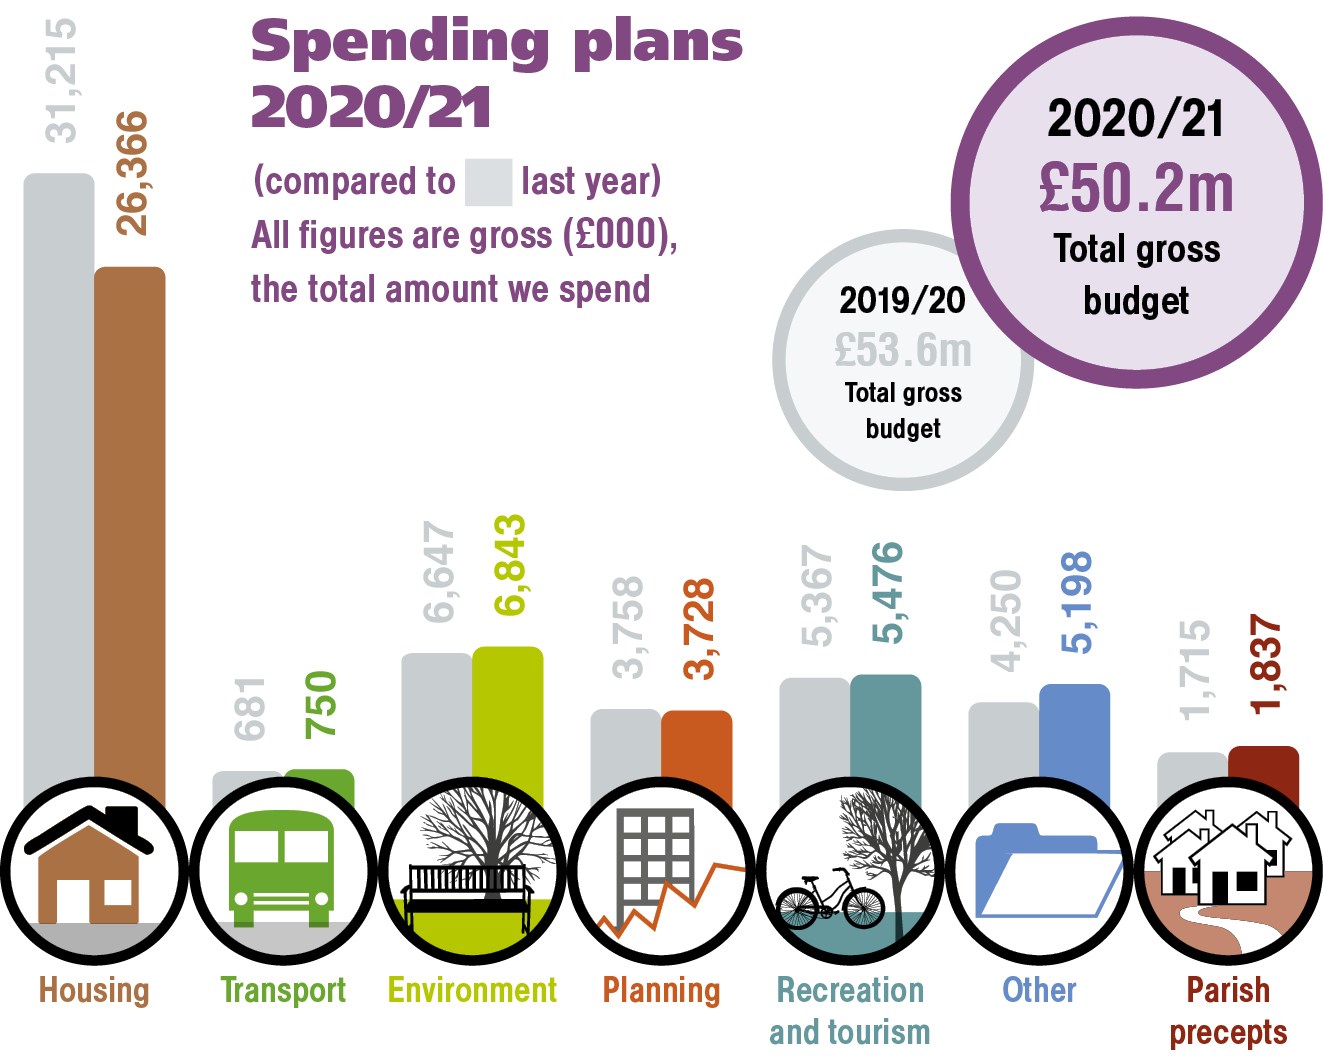 Bar chart of gross spending plans for 2020/21 compared with 2019/20